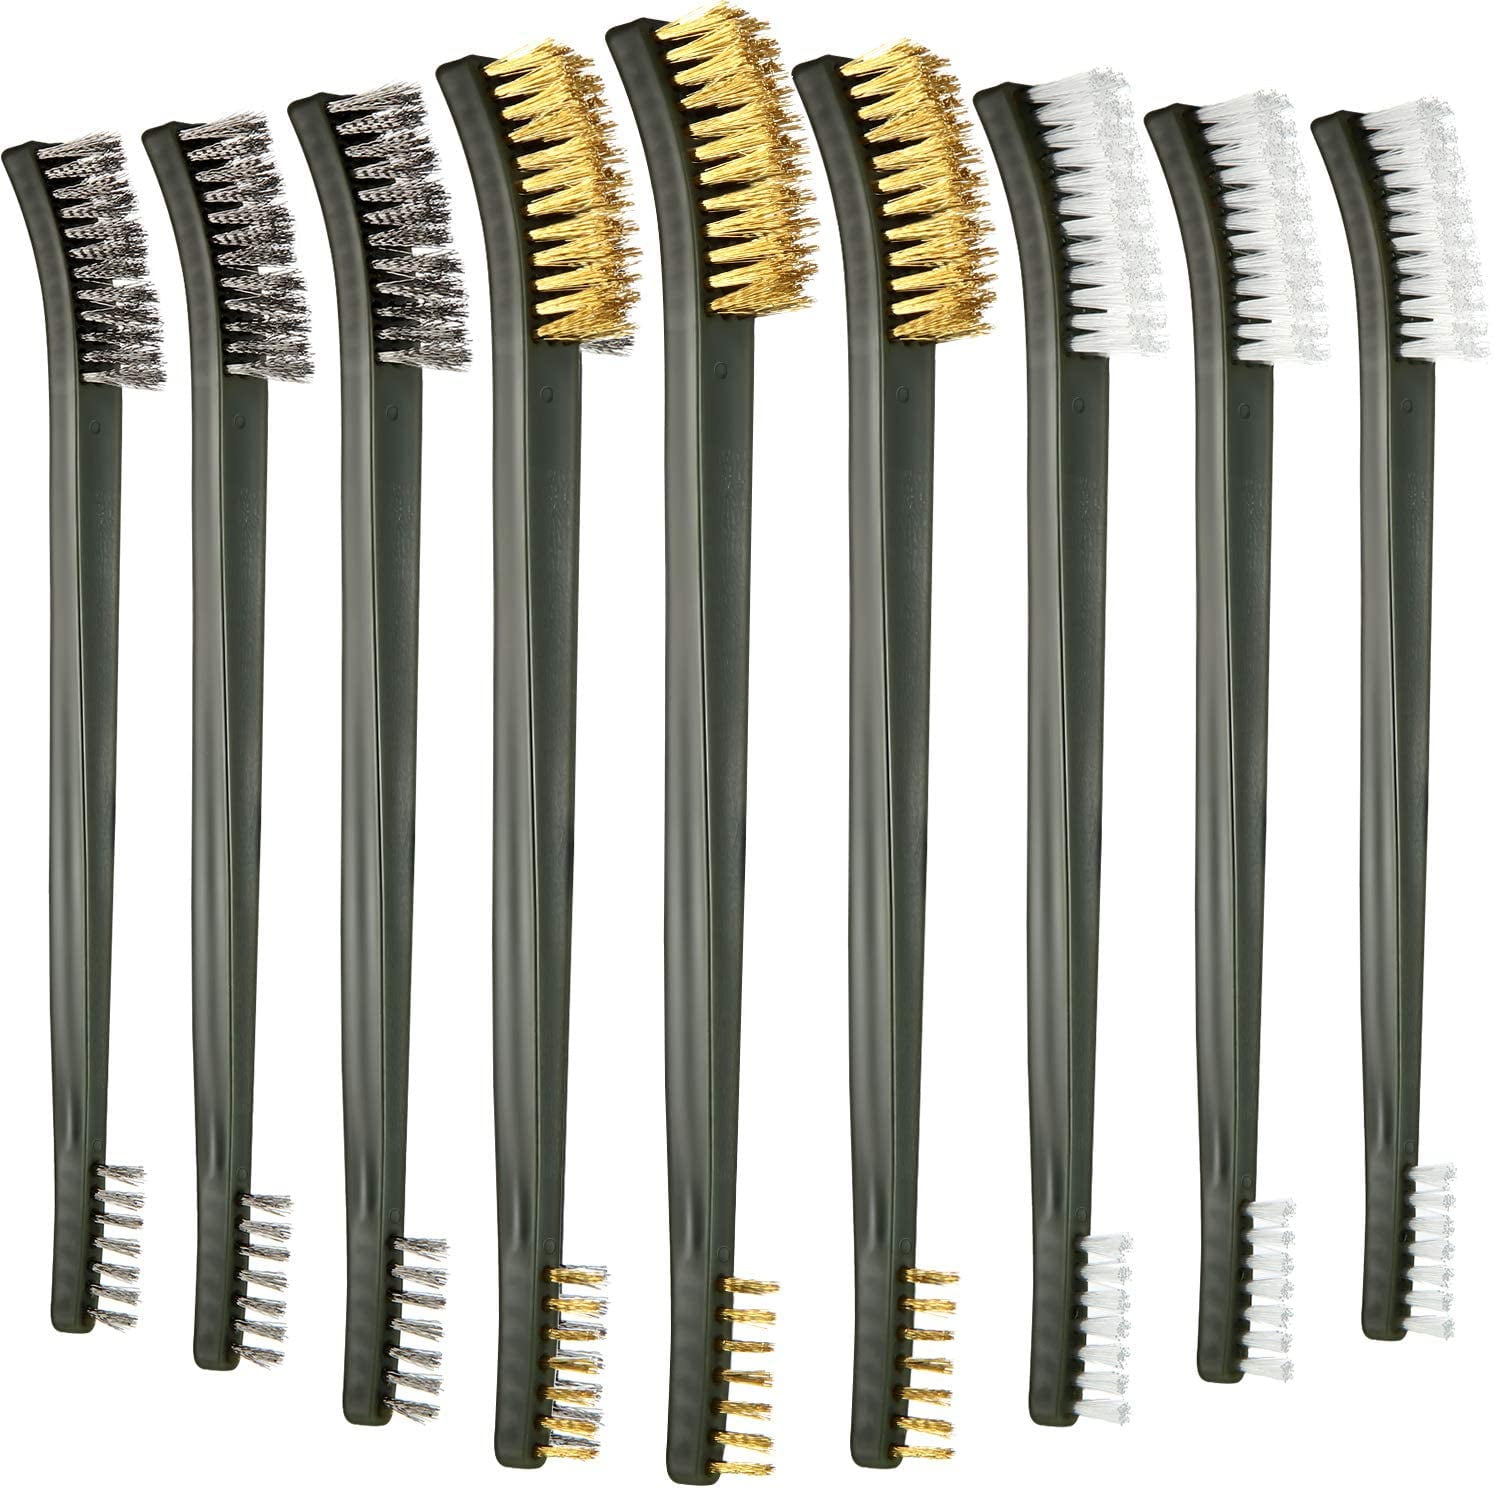 1 Brass 1 Steel 3 Piece 9" Brush Set 1 Nylon Bristle Ideal for Auto Cleaning 